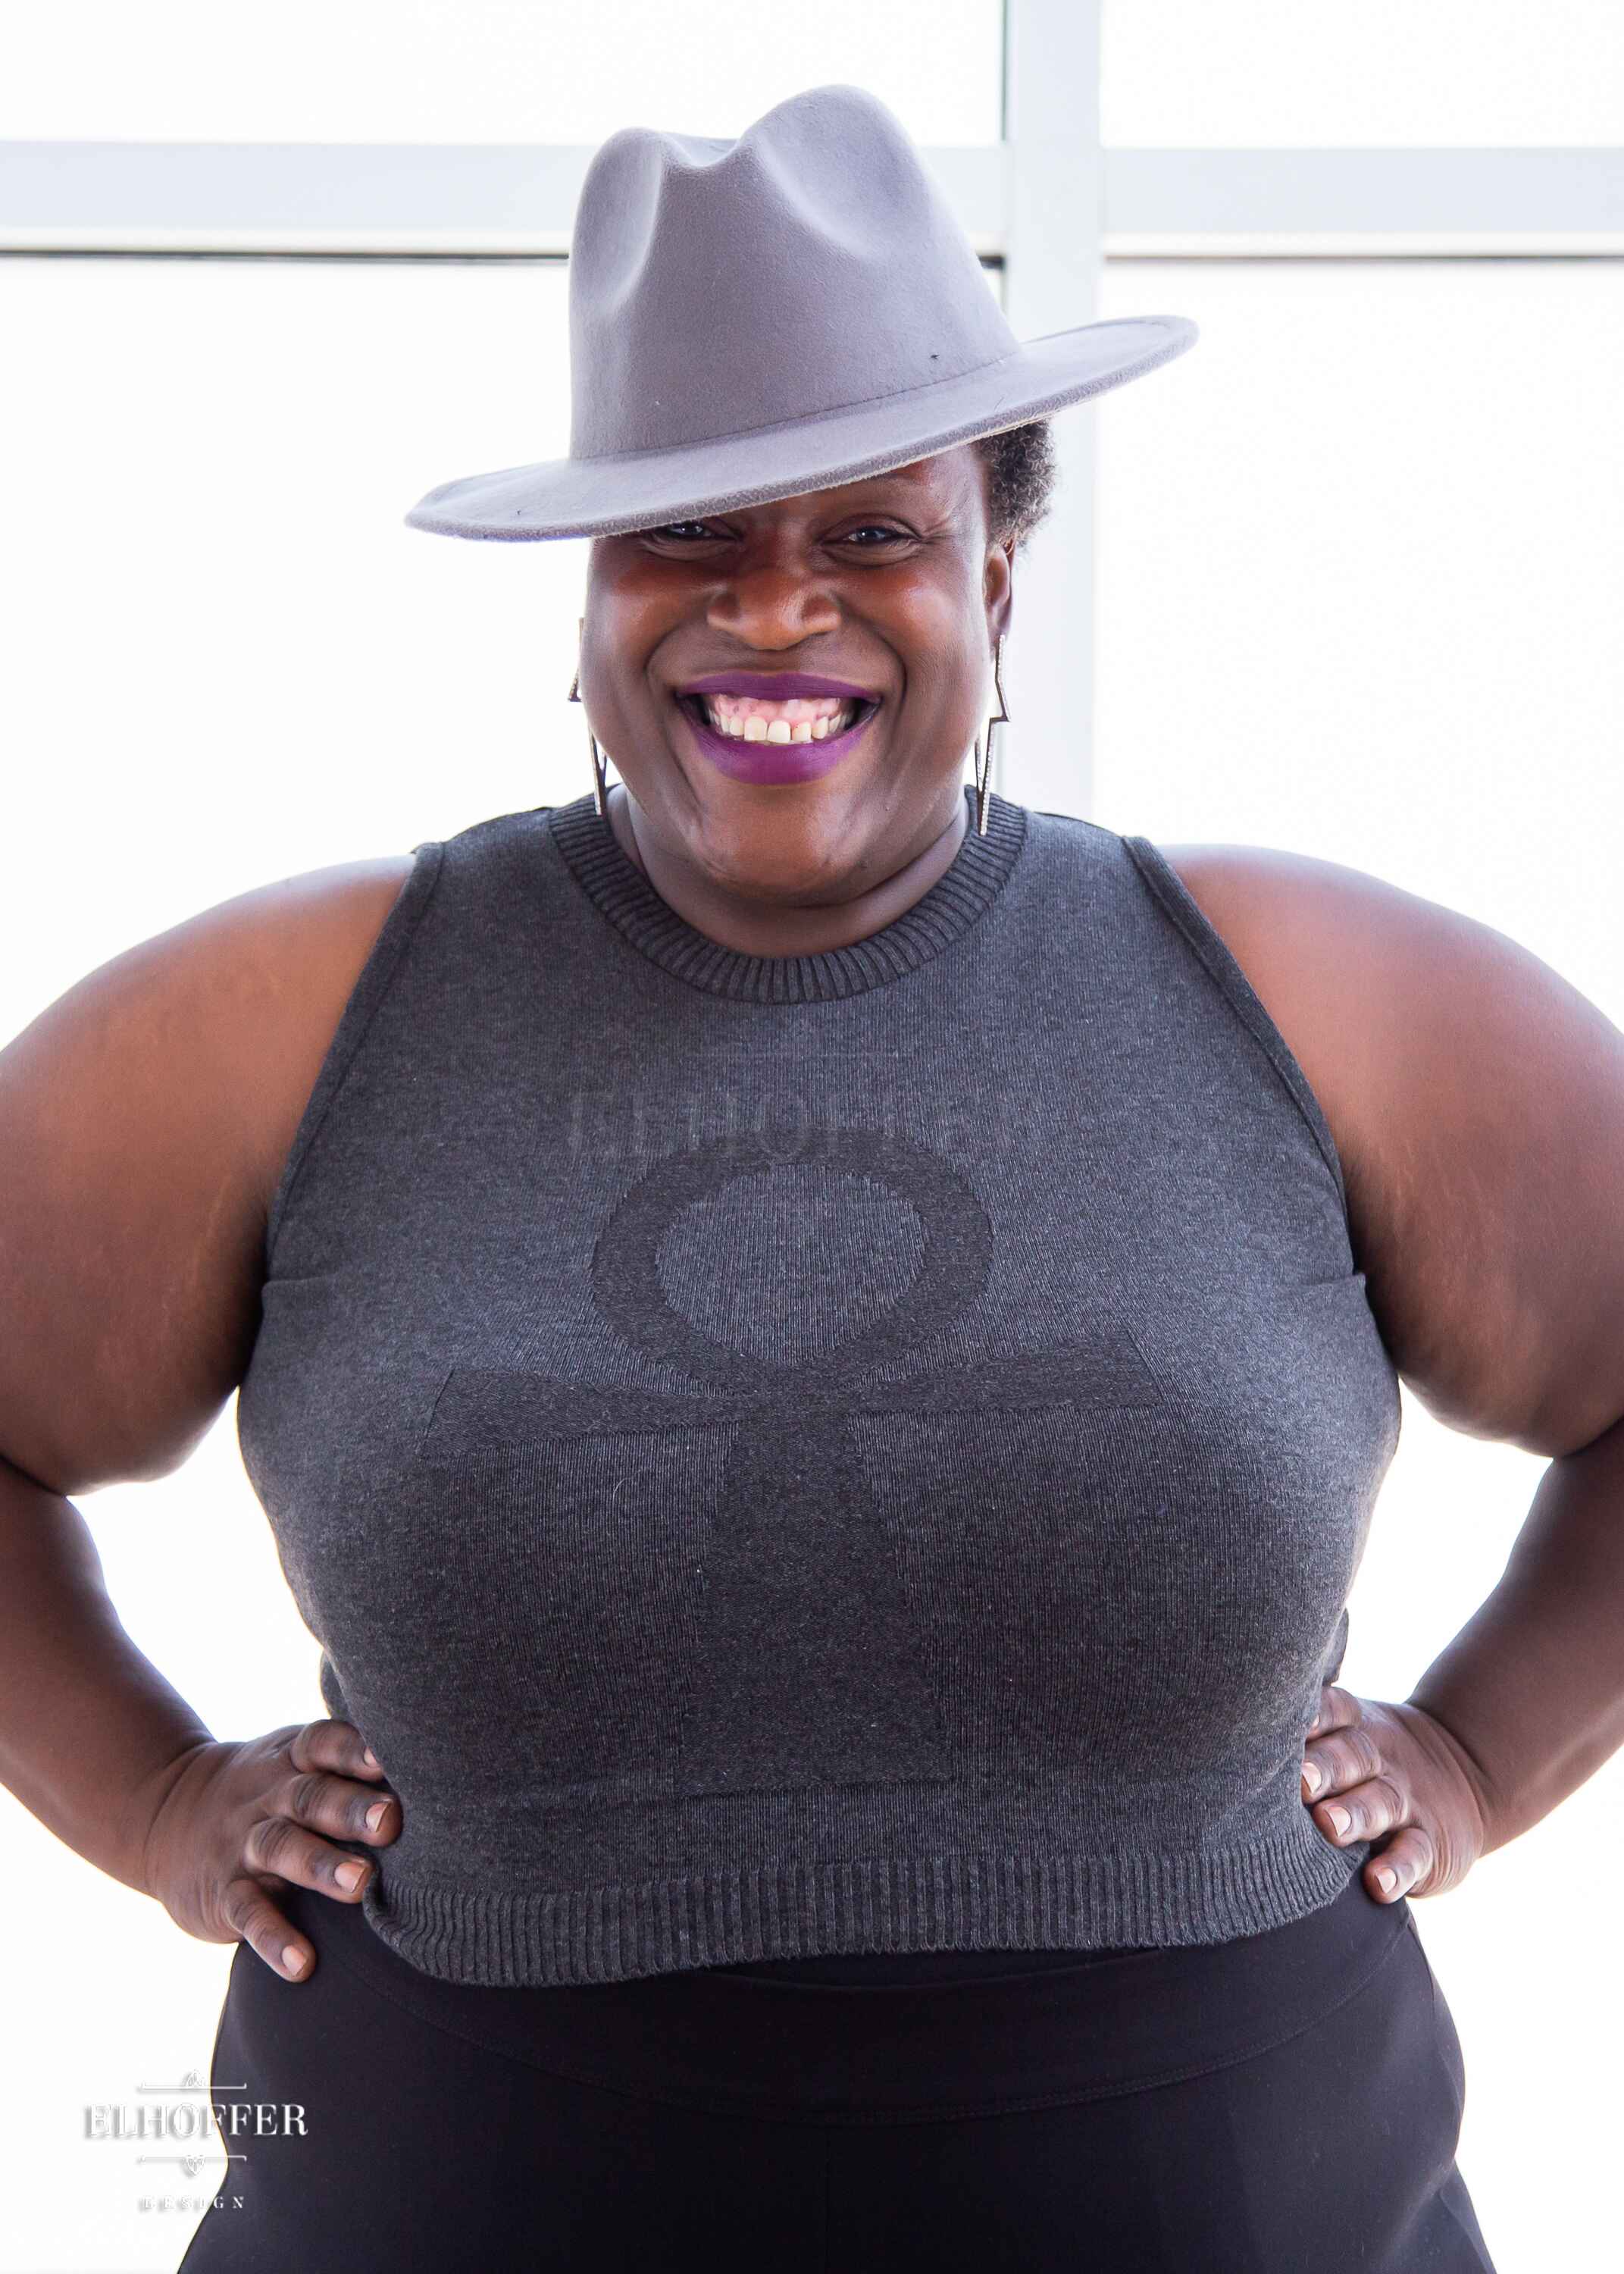 Adalgiza, a medium dark skinned 4xl model with short dark super curly hair, is smiling while wearing a dark grey sleeveless knit crop top with a large subtle ankh design on the front.